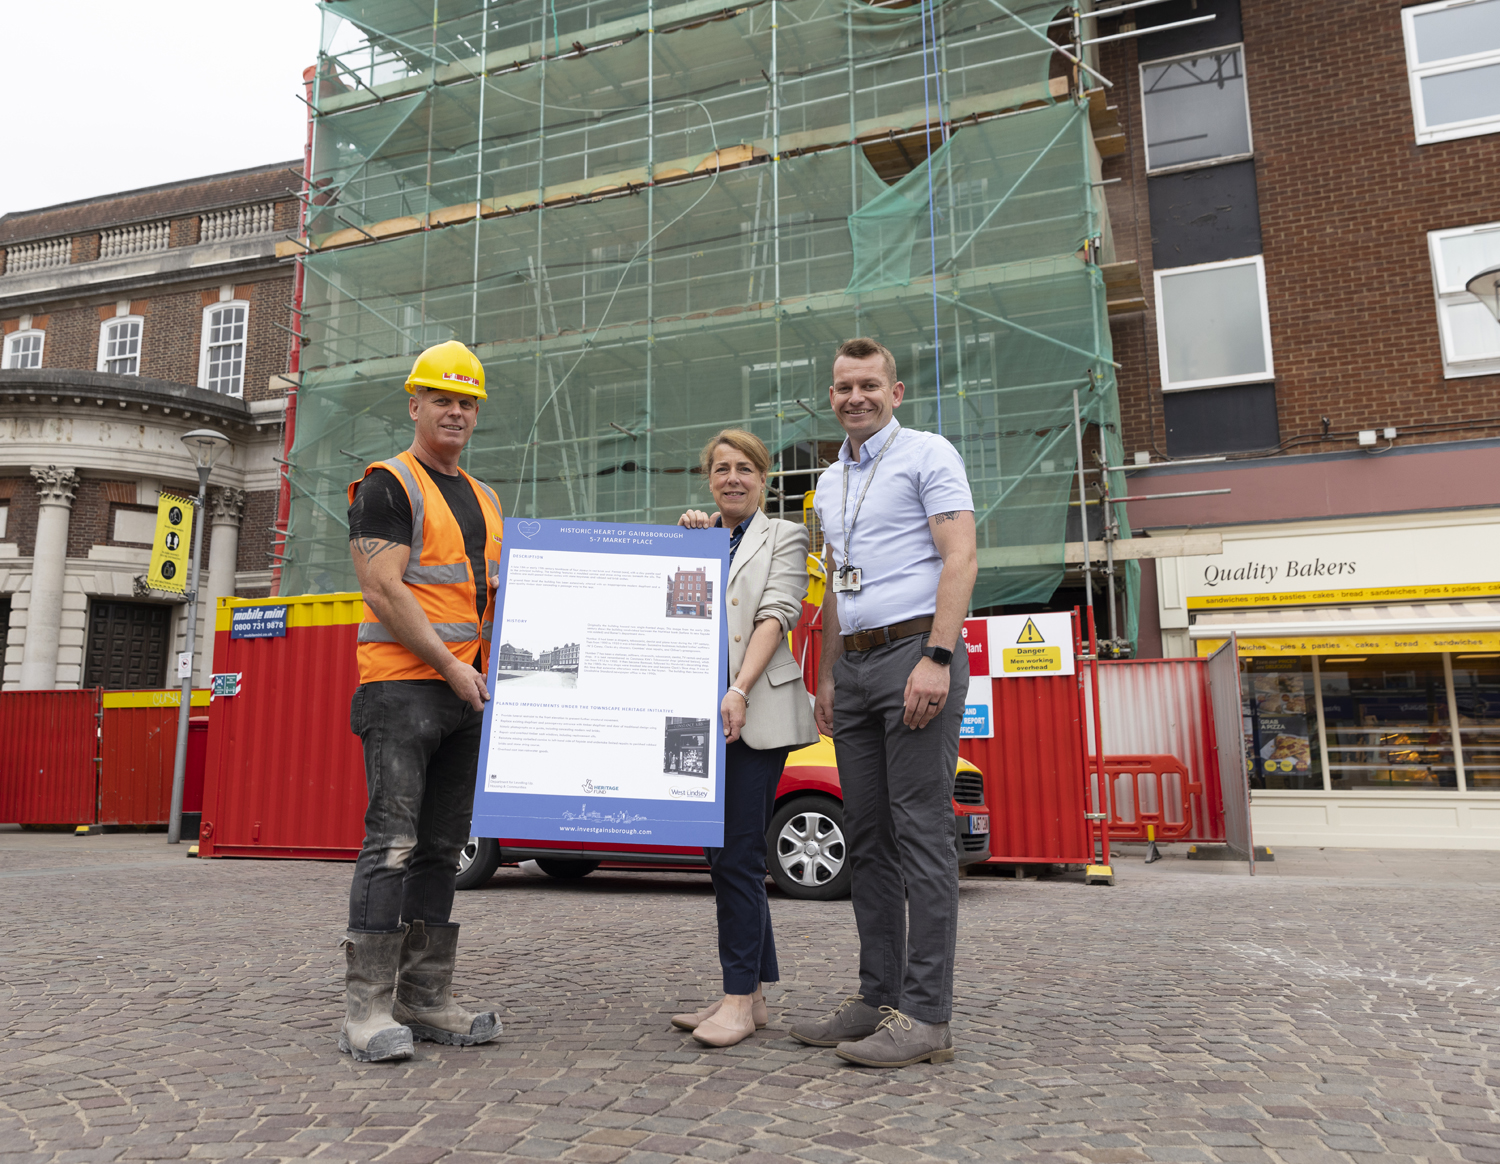 Buildings in the historic heart of Gainsborough are set to be transformed to their former glory